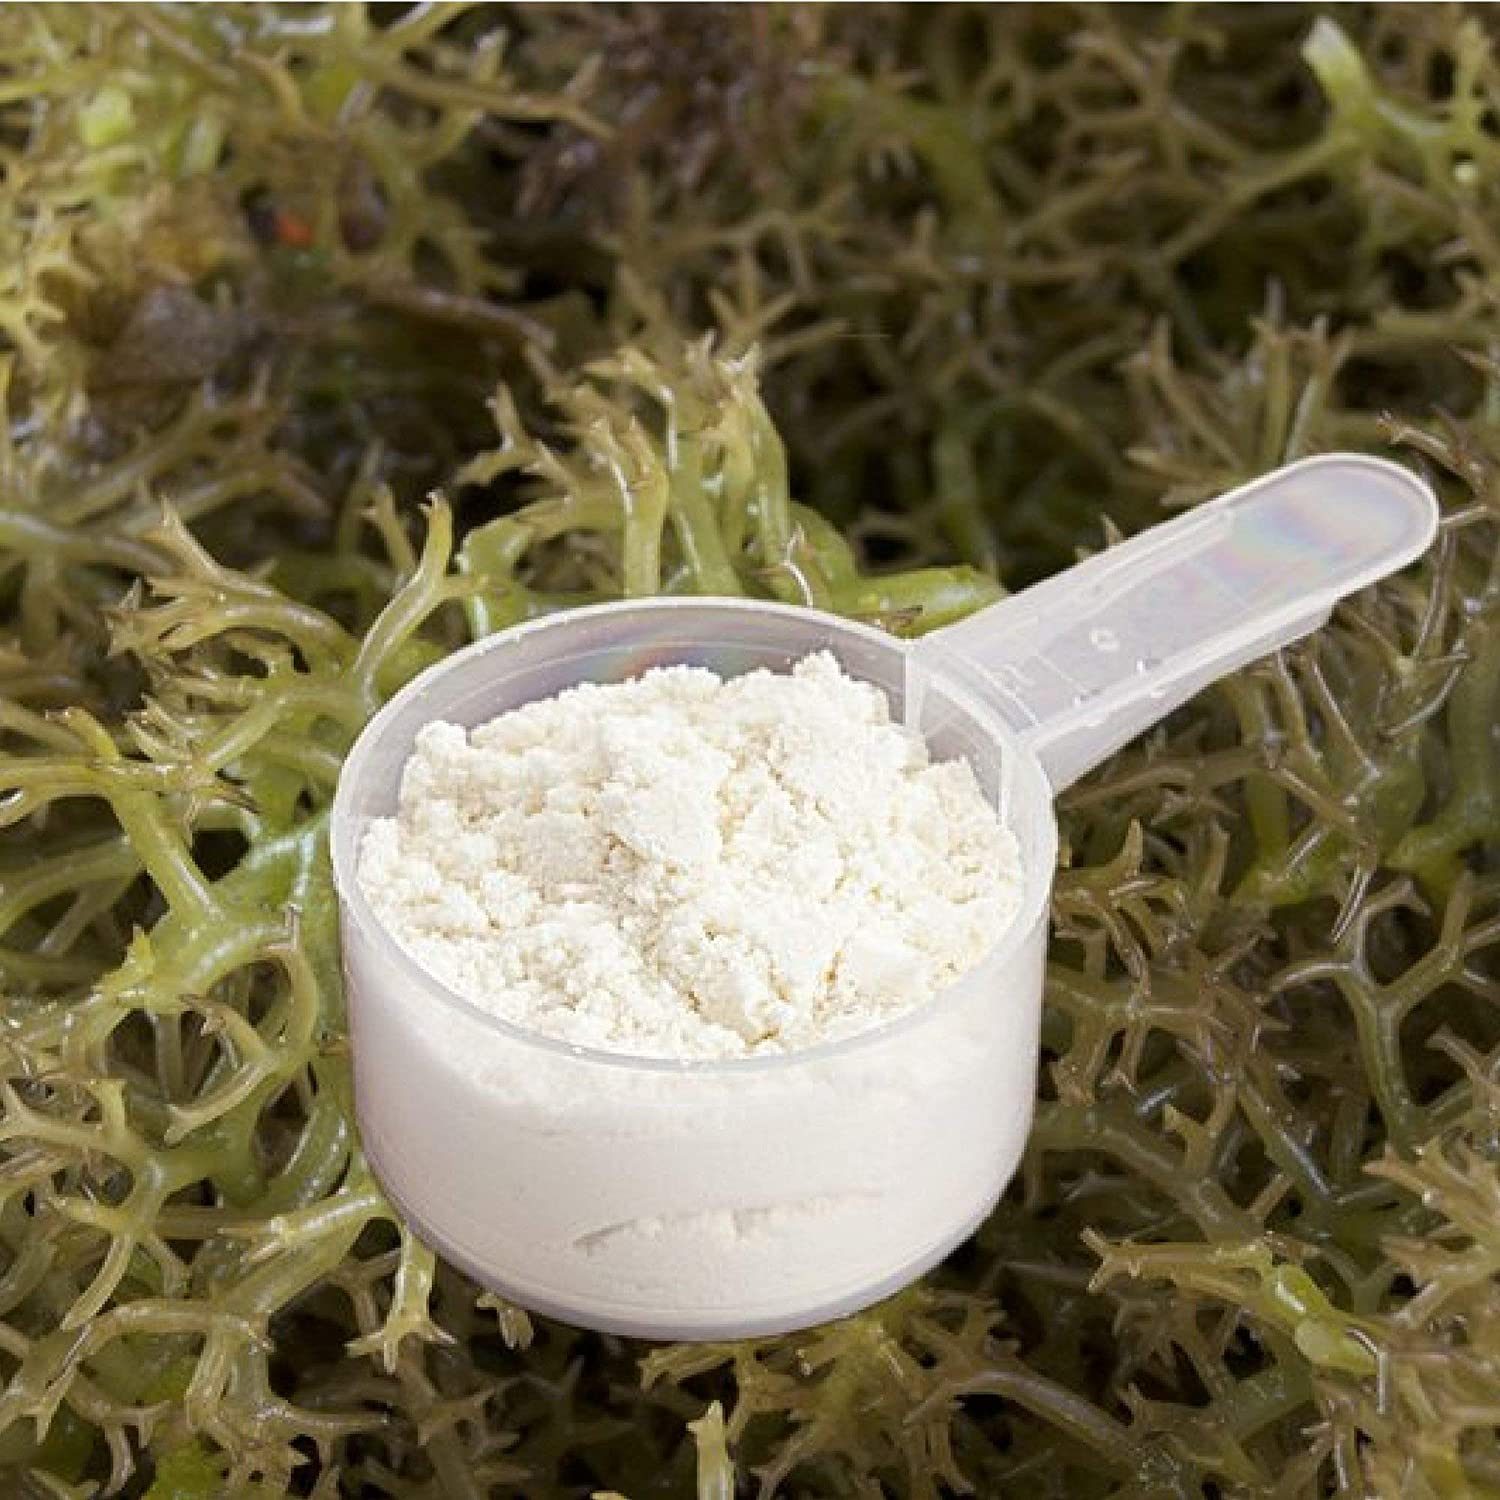 What Is Carrageenan Used For in Personal Care Products?